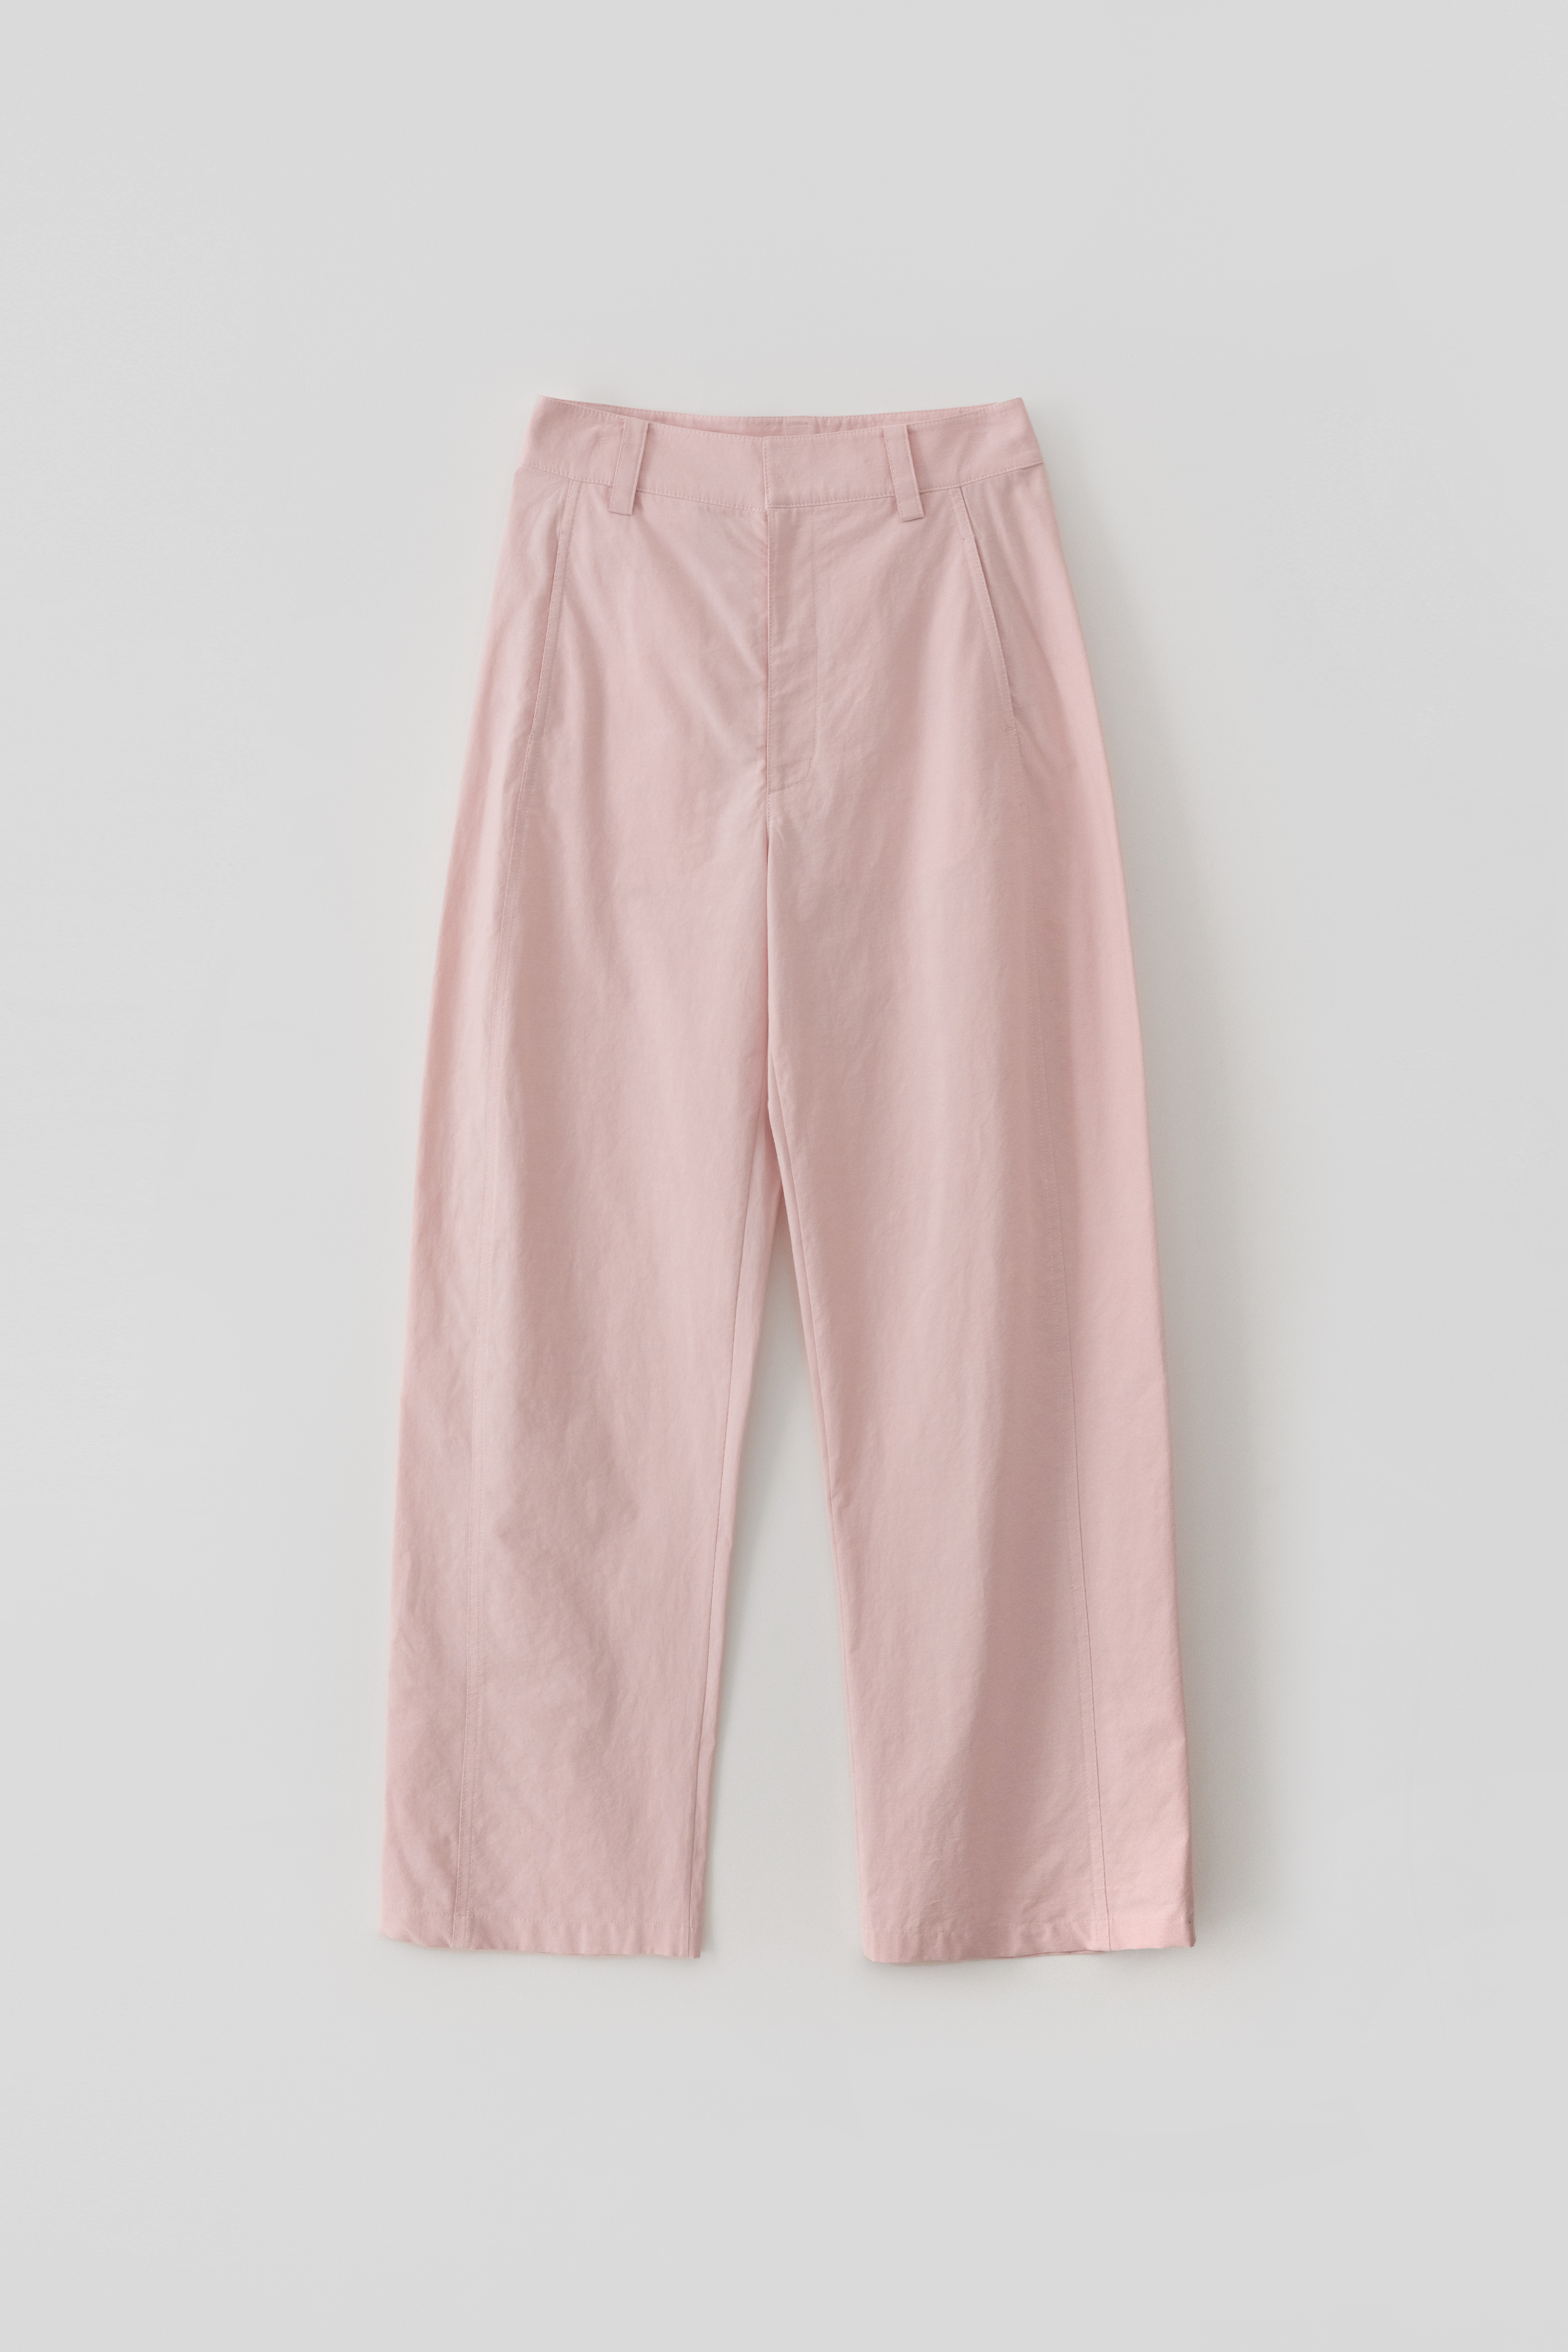 Pure Curve Pants_Ice Pink